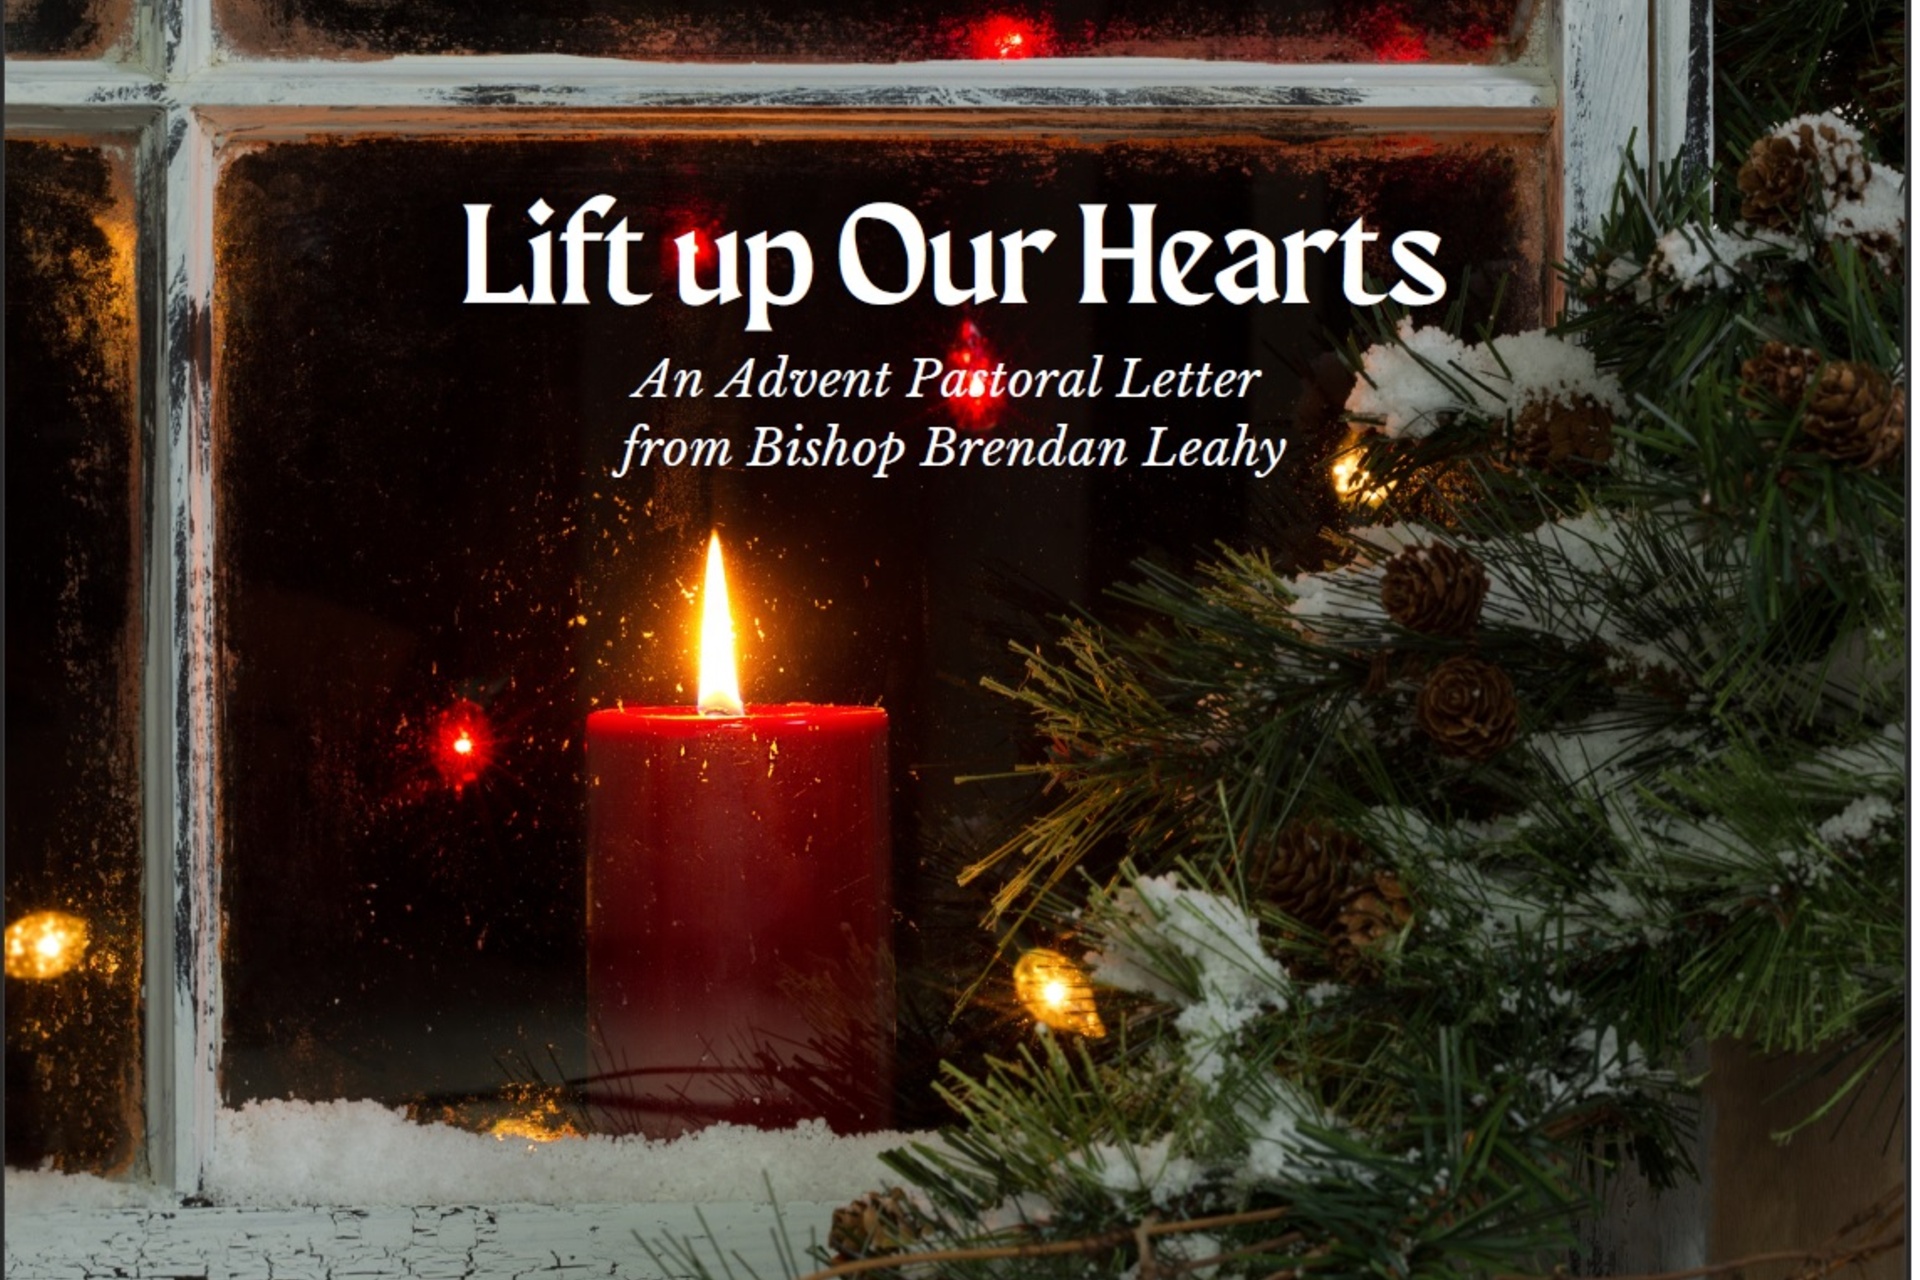 Lift up Our Hearts - An Advent Pastoral Letter from Bishop Brendan Leahy